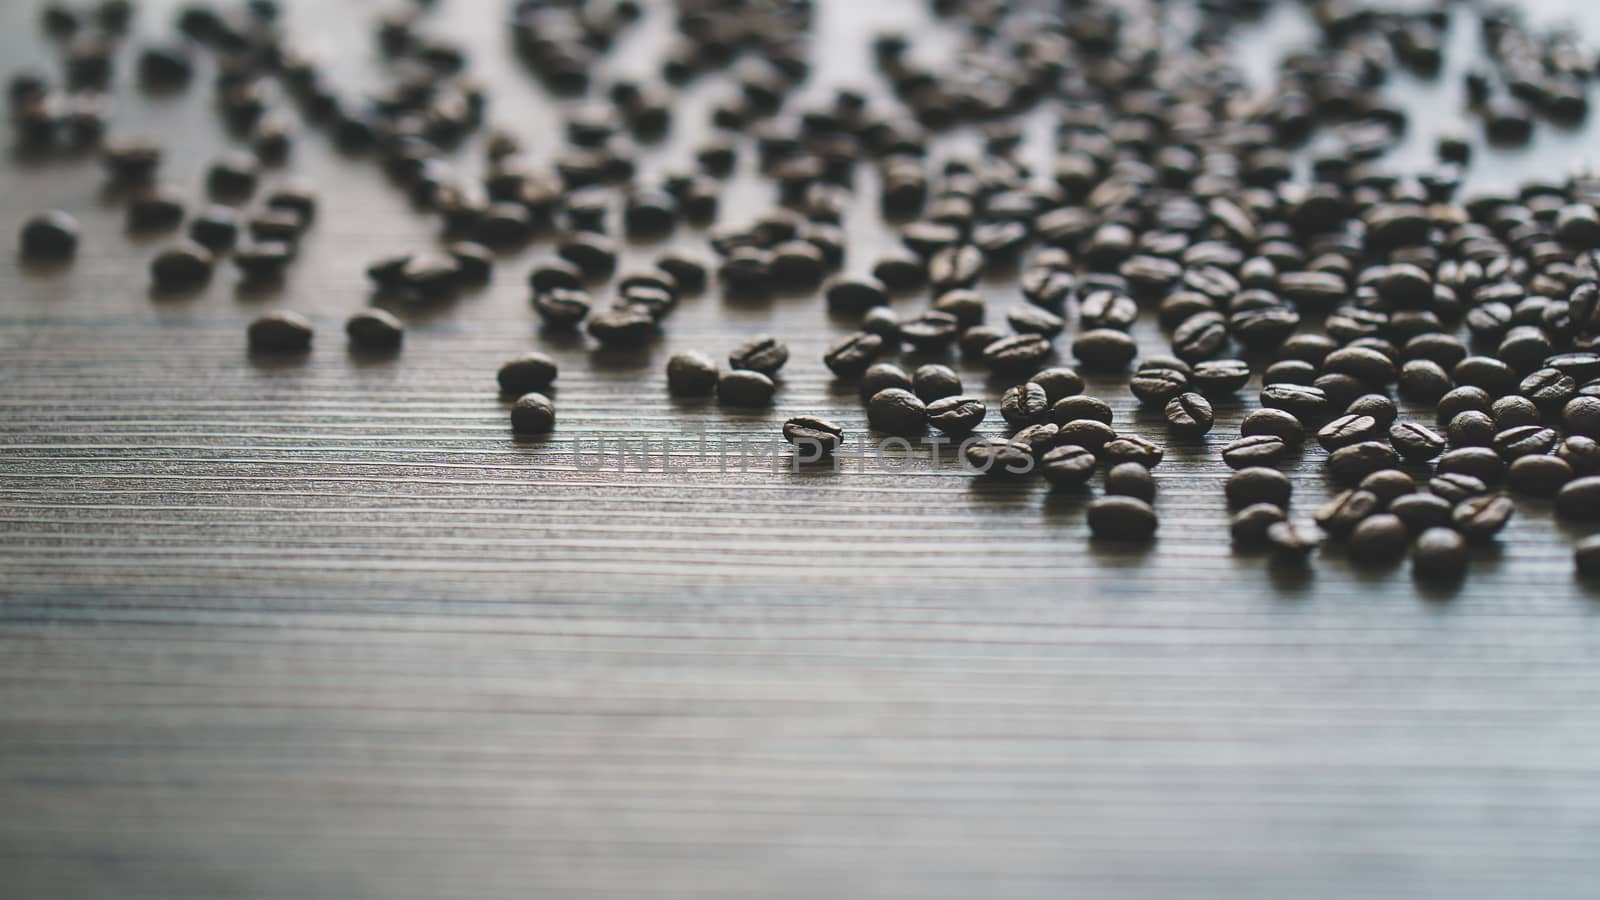 Coffee beans. On a wooden background. by sirawit99